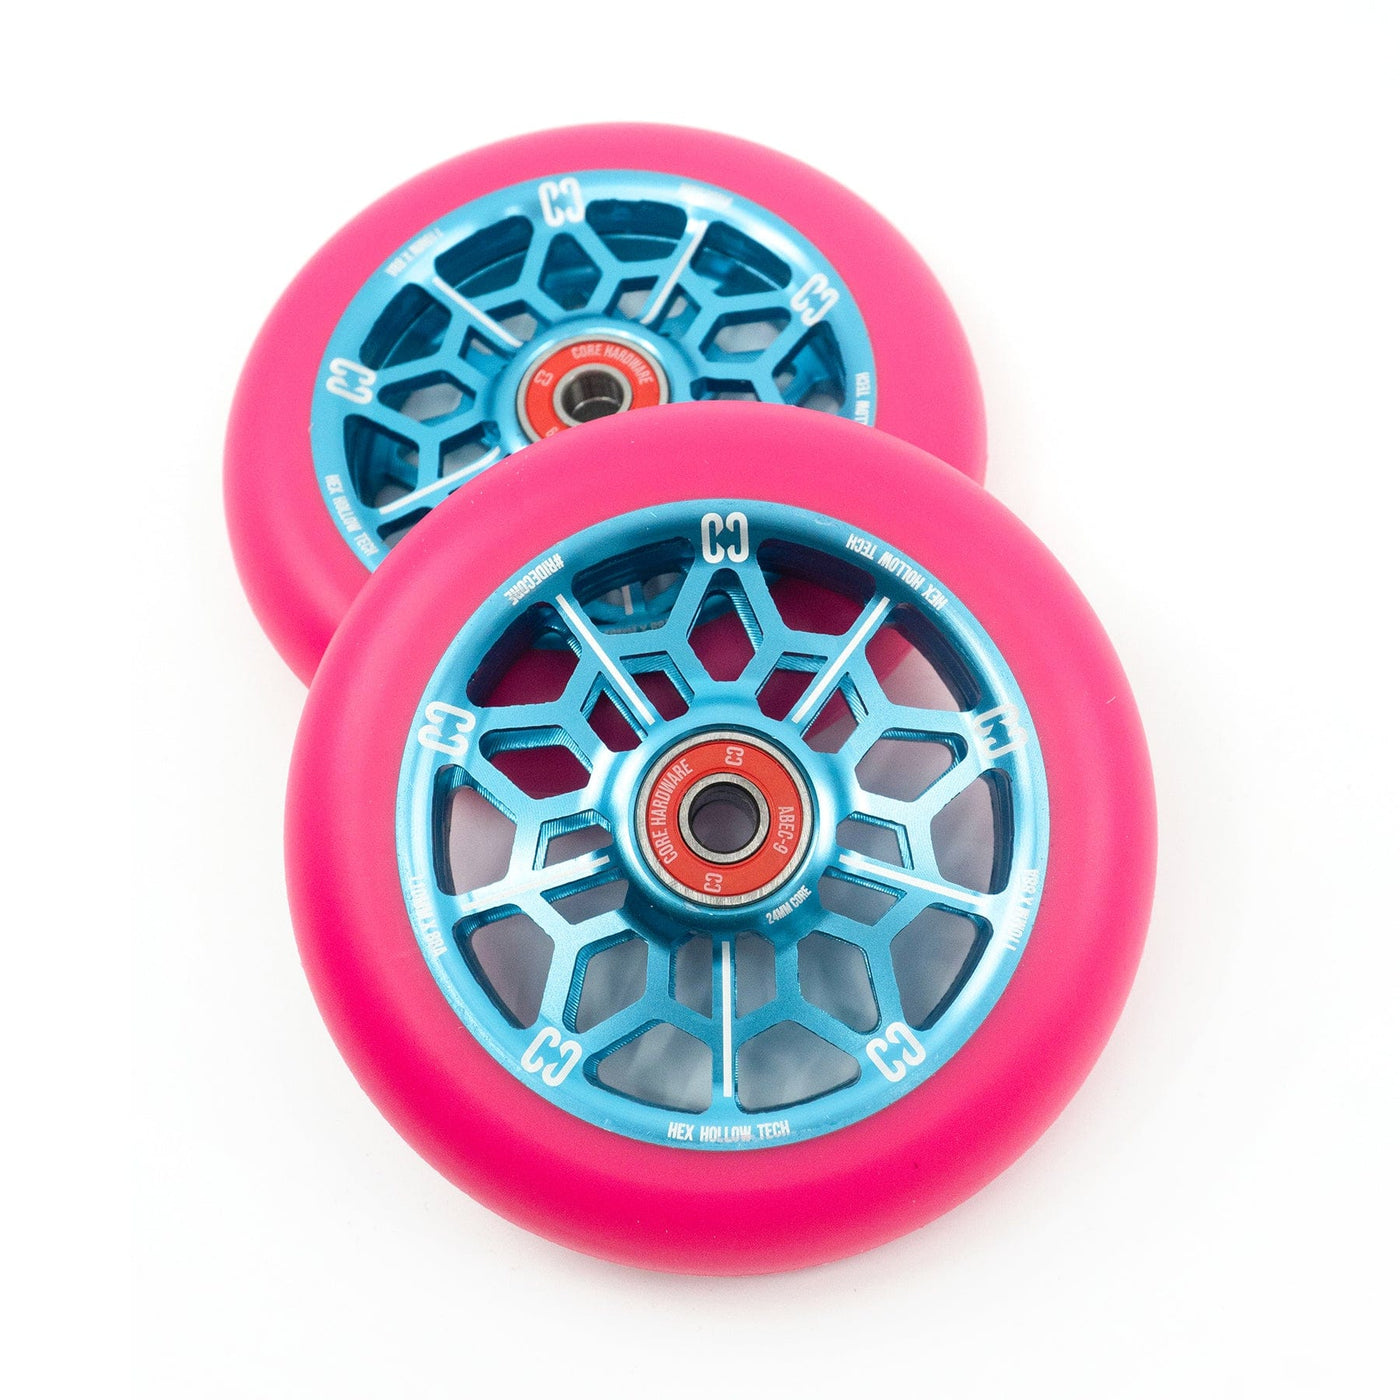 CORE Hex Hollow Stunt Pink & Blue Scooter Wheel 110mm I Scooter Wheel Paired